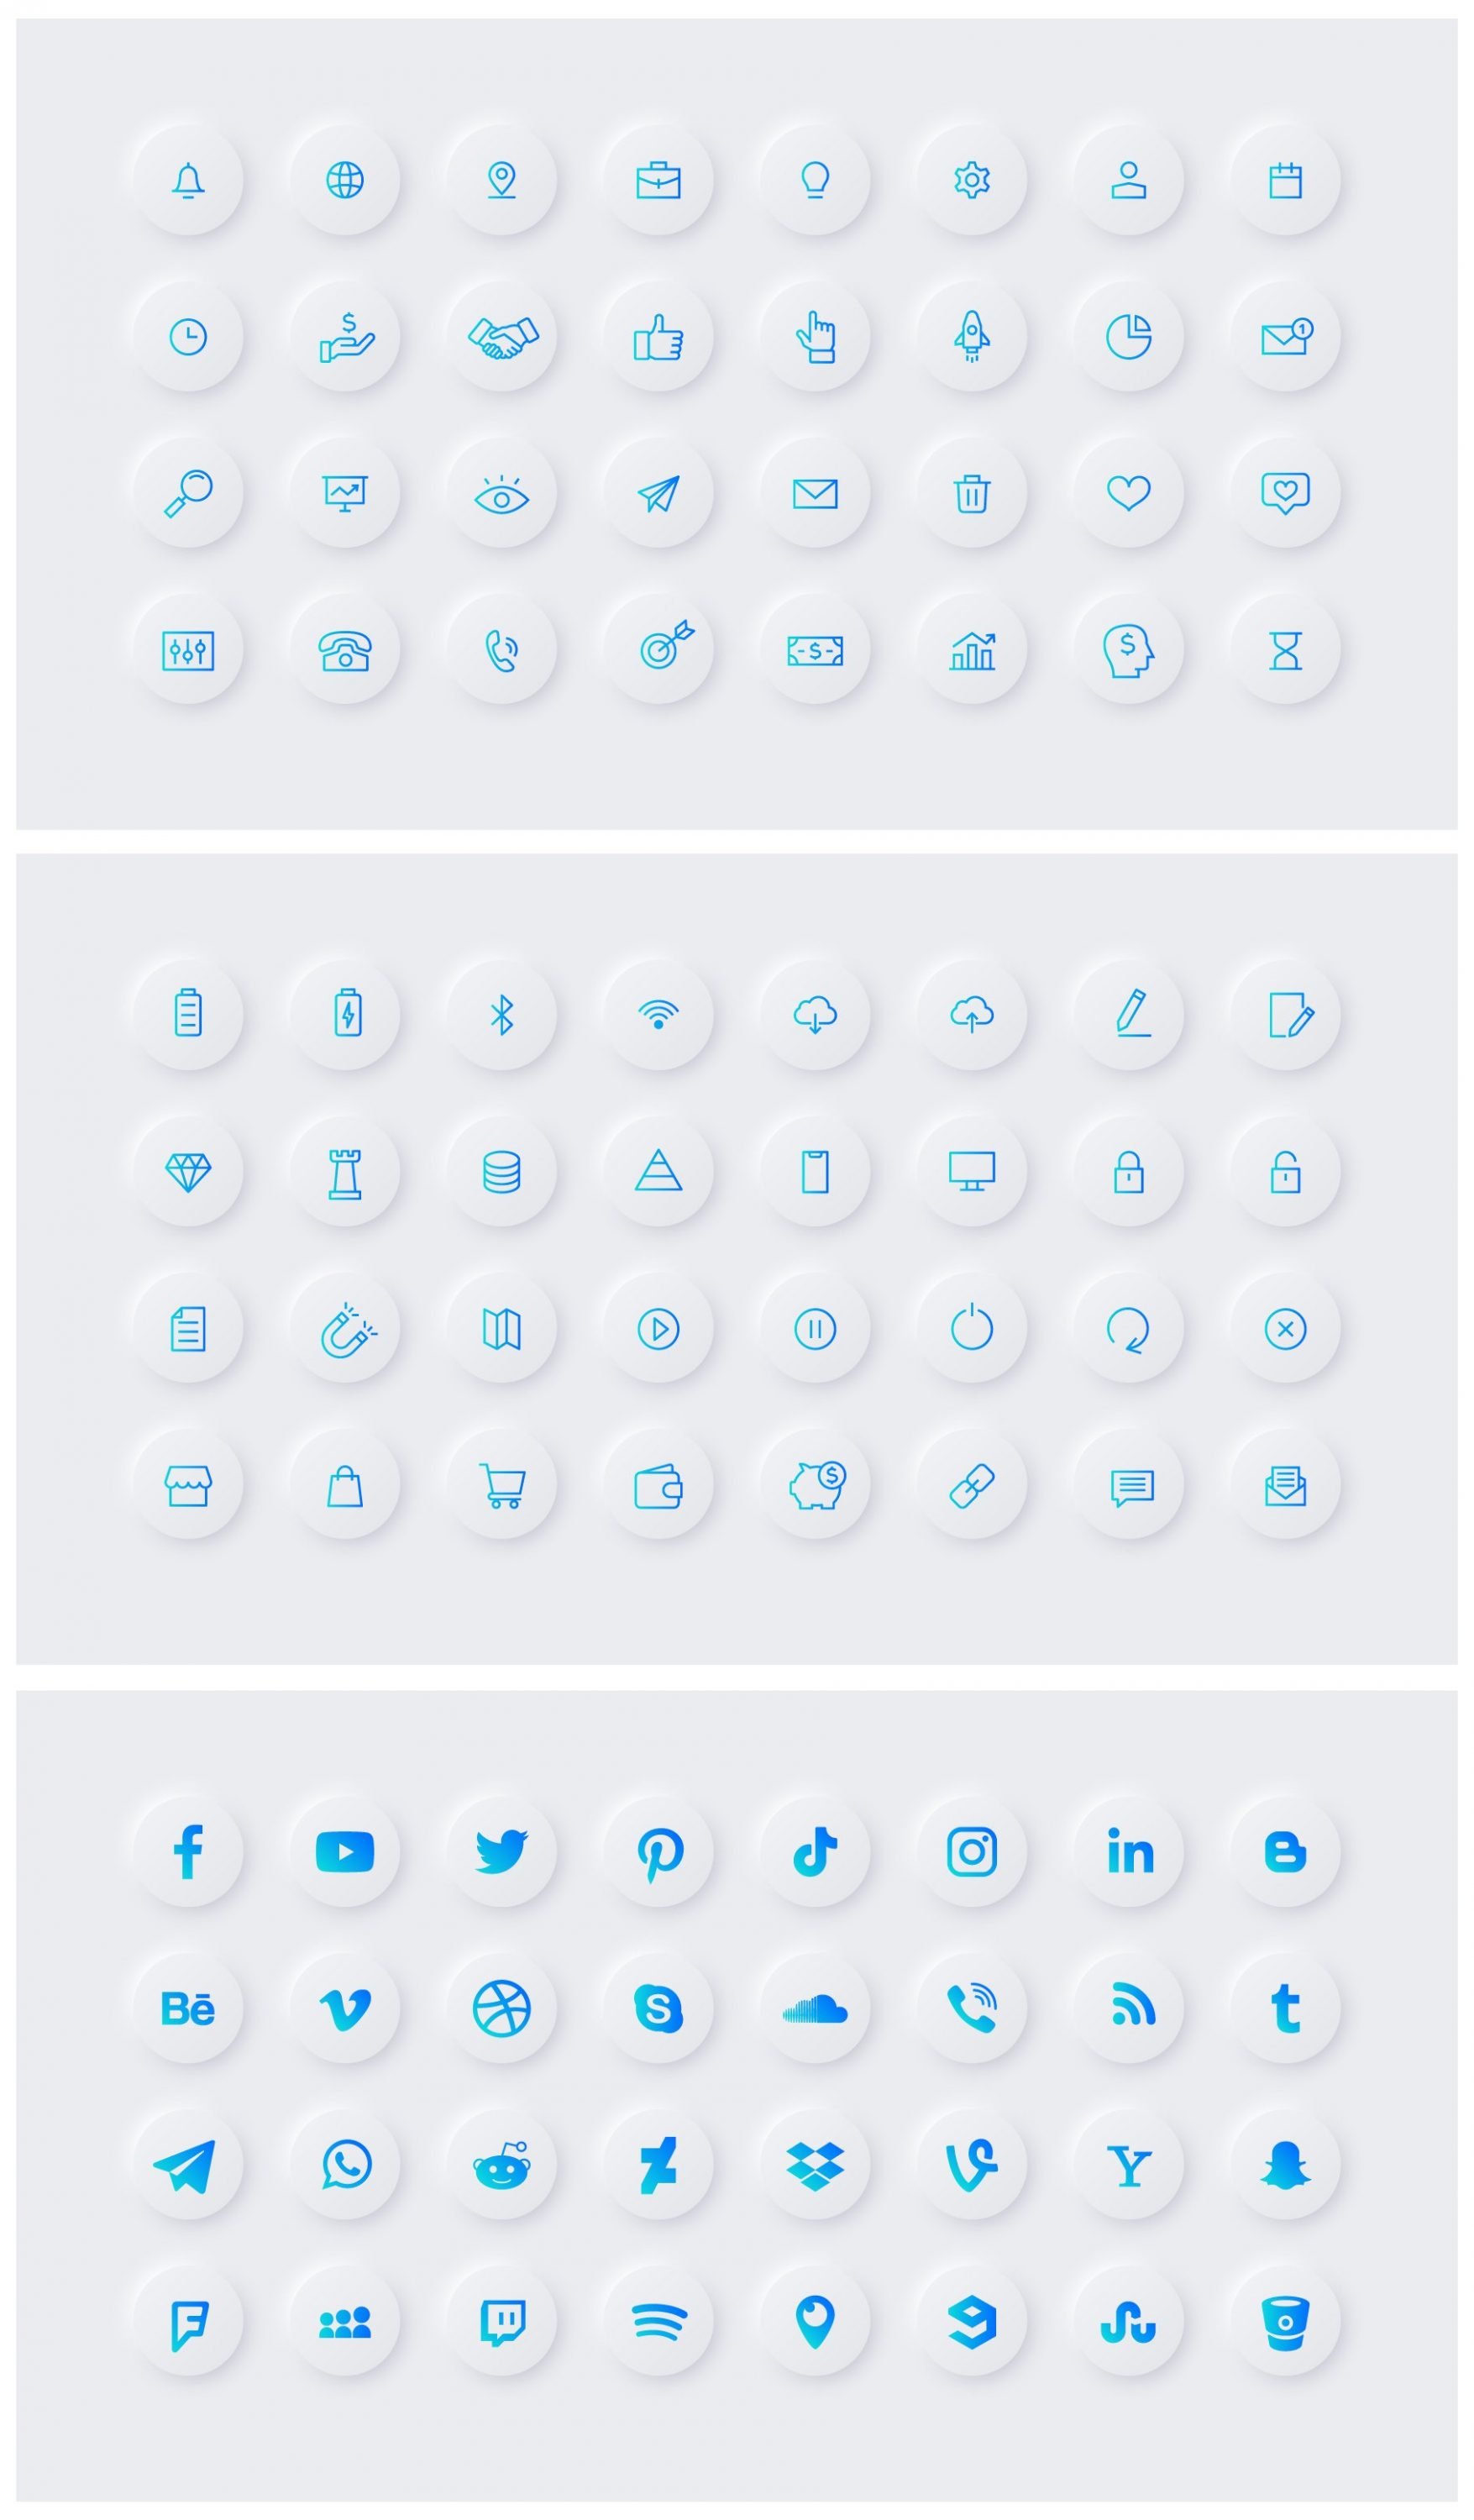 Use the icons from the template to decorate and complement your presentation.